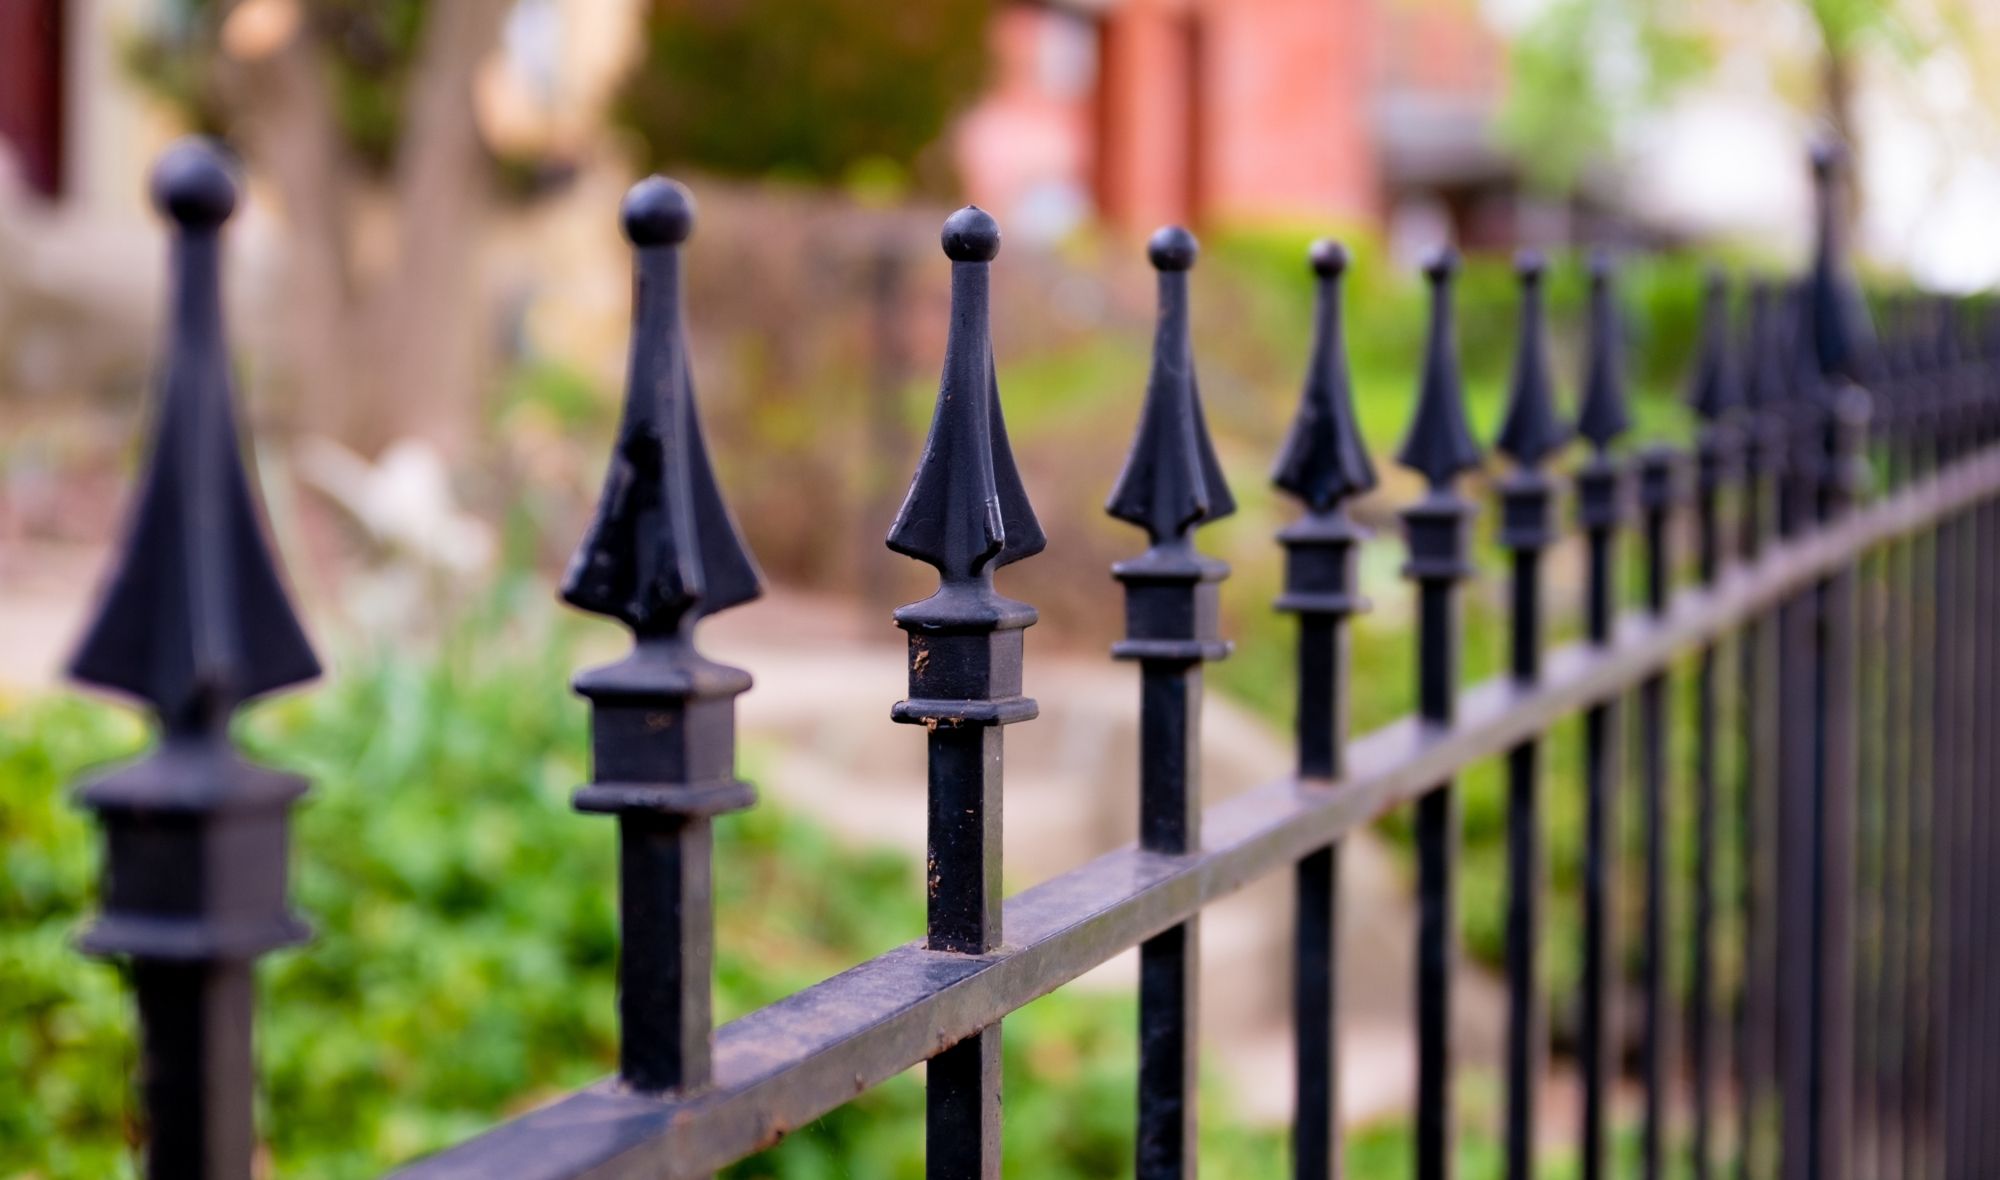 The elegance of wrought iron: a classic type of fence